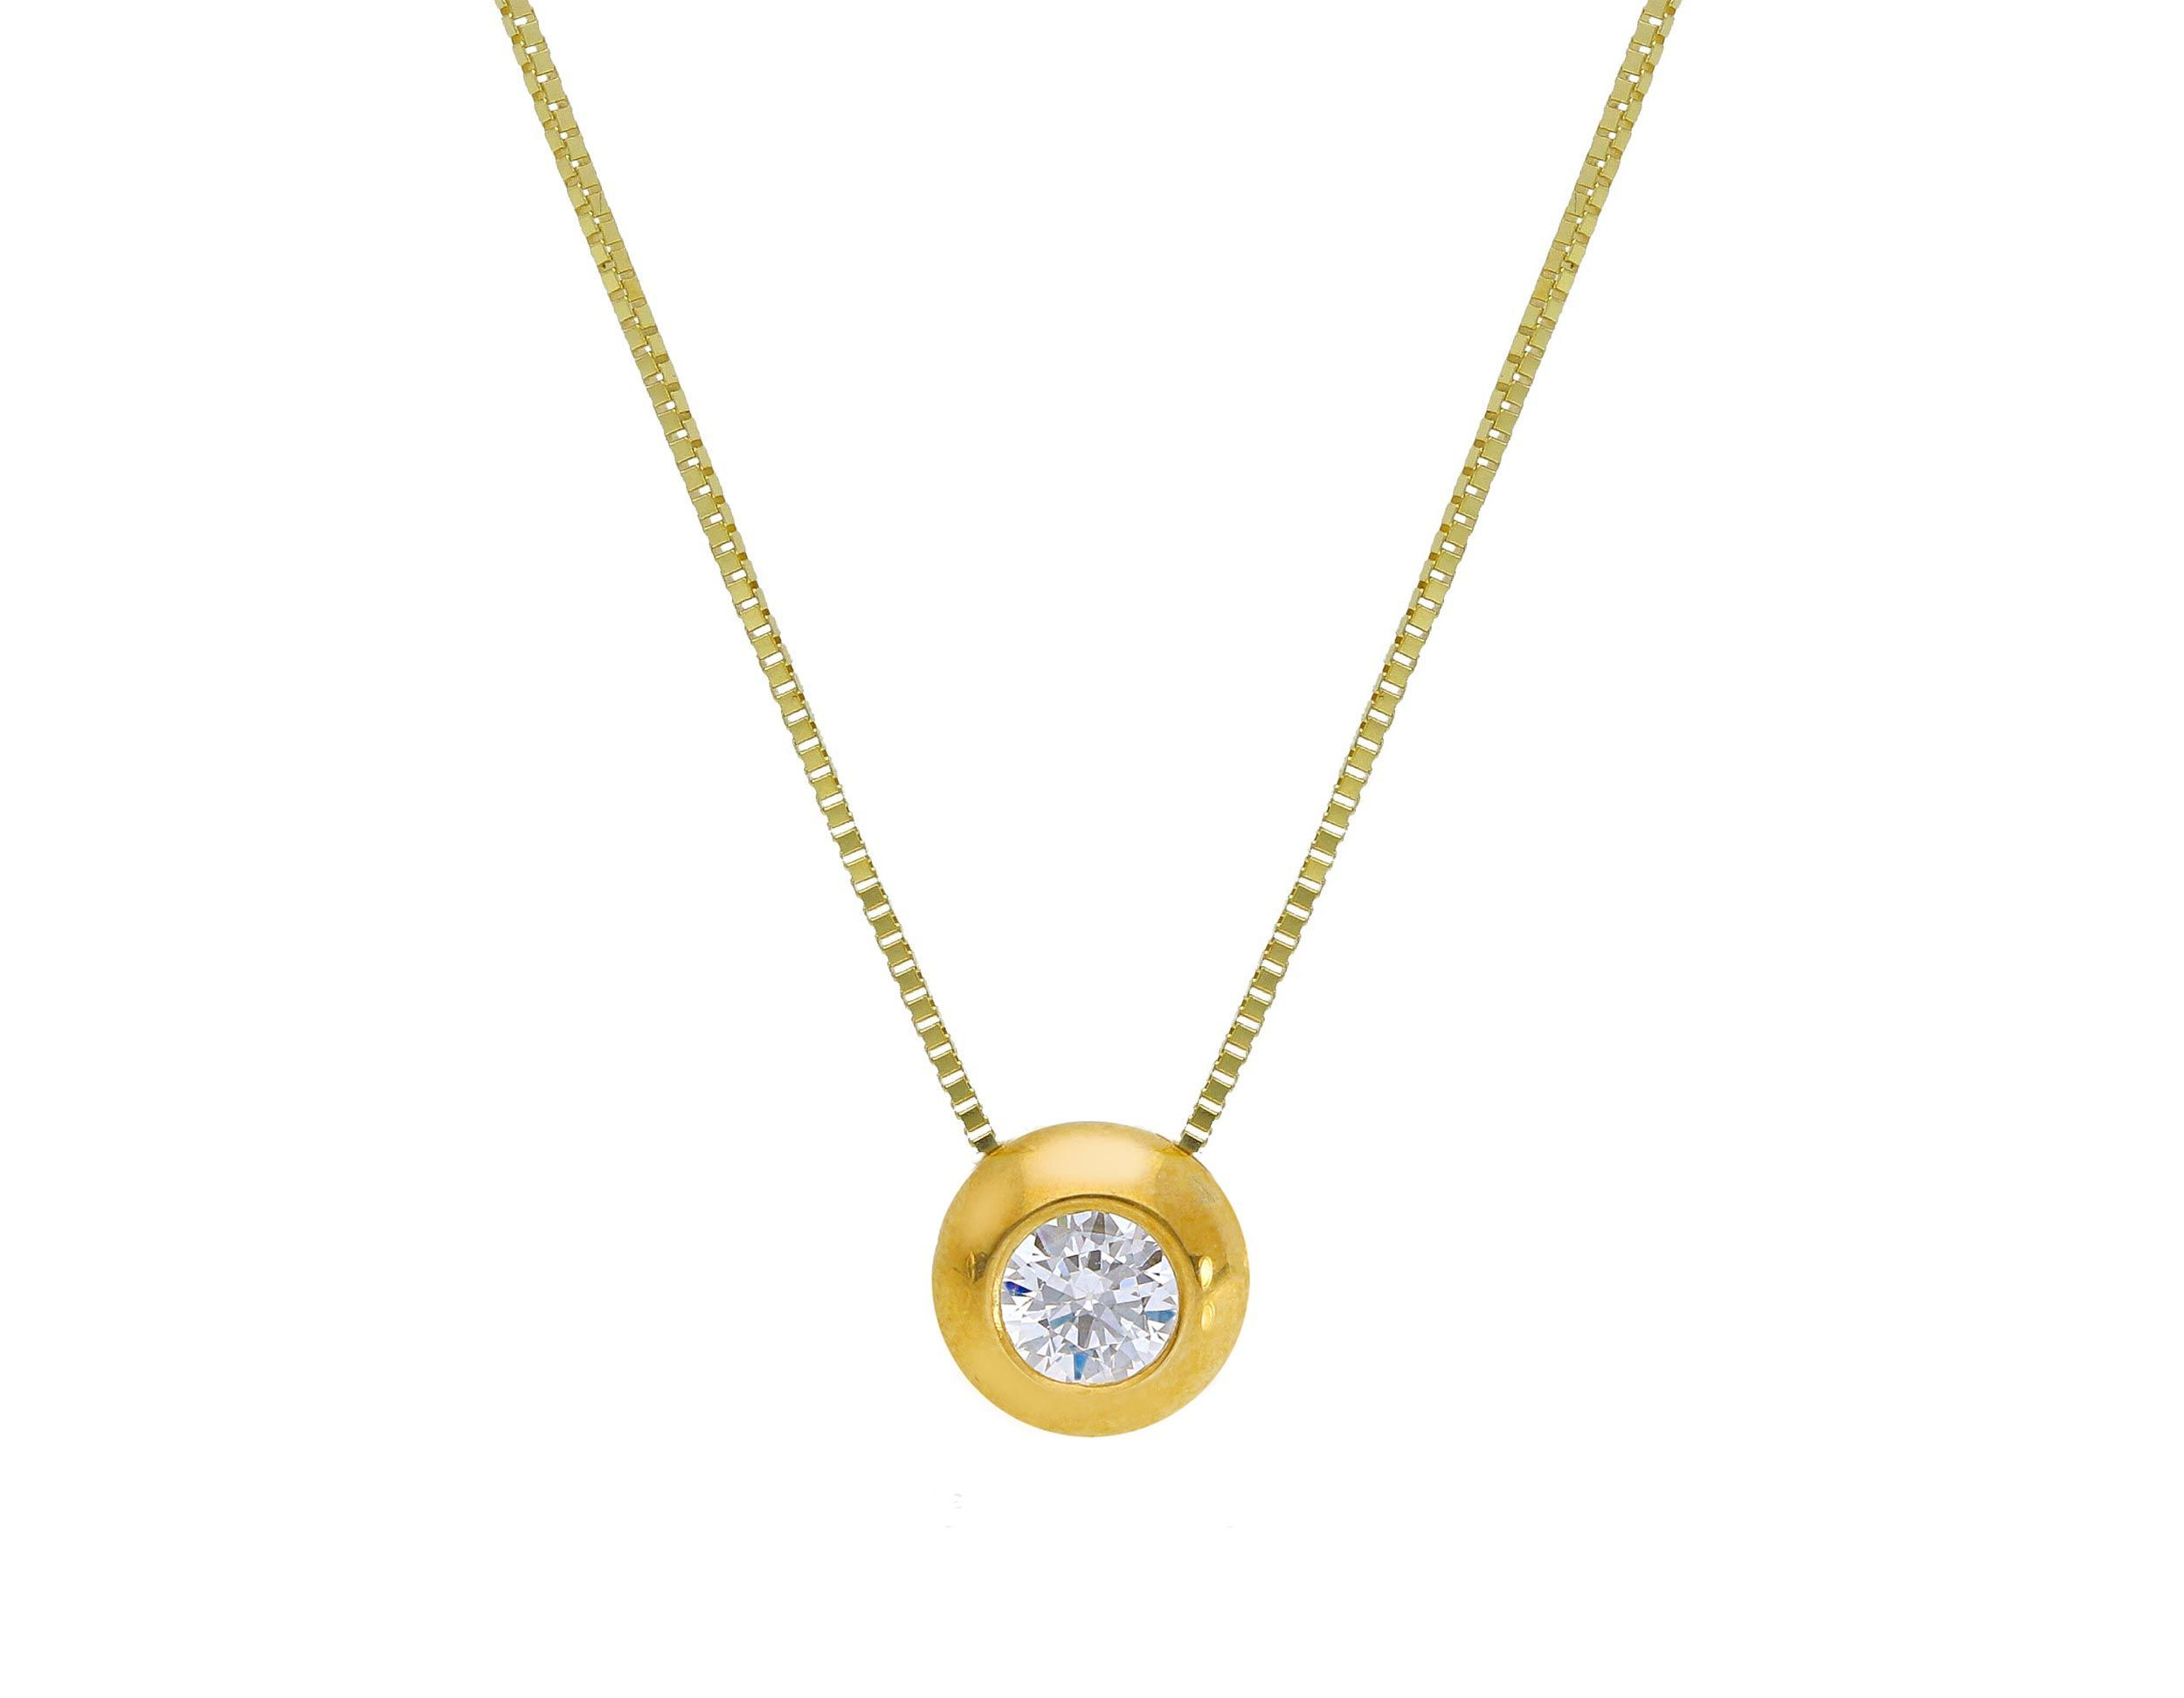 Goden necklace k9 with white zircon (code S173892)